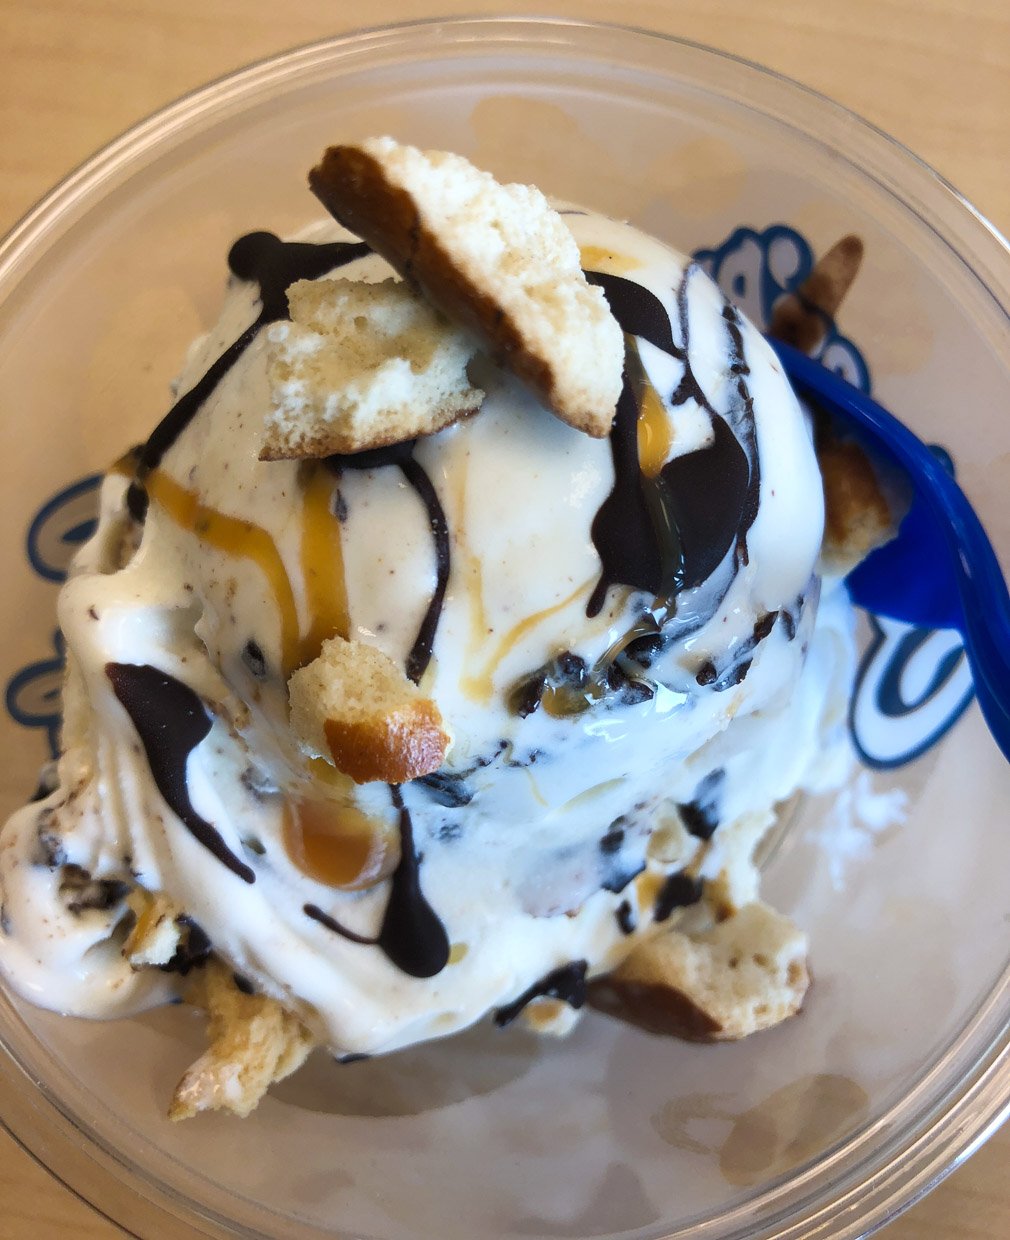 culver's flavor of the day viroqua